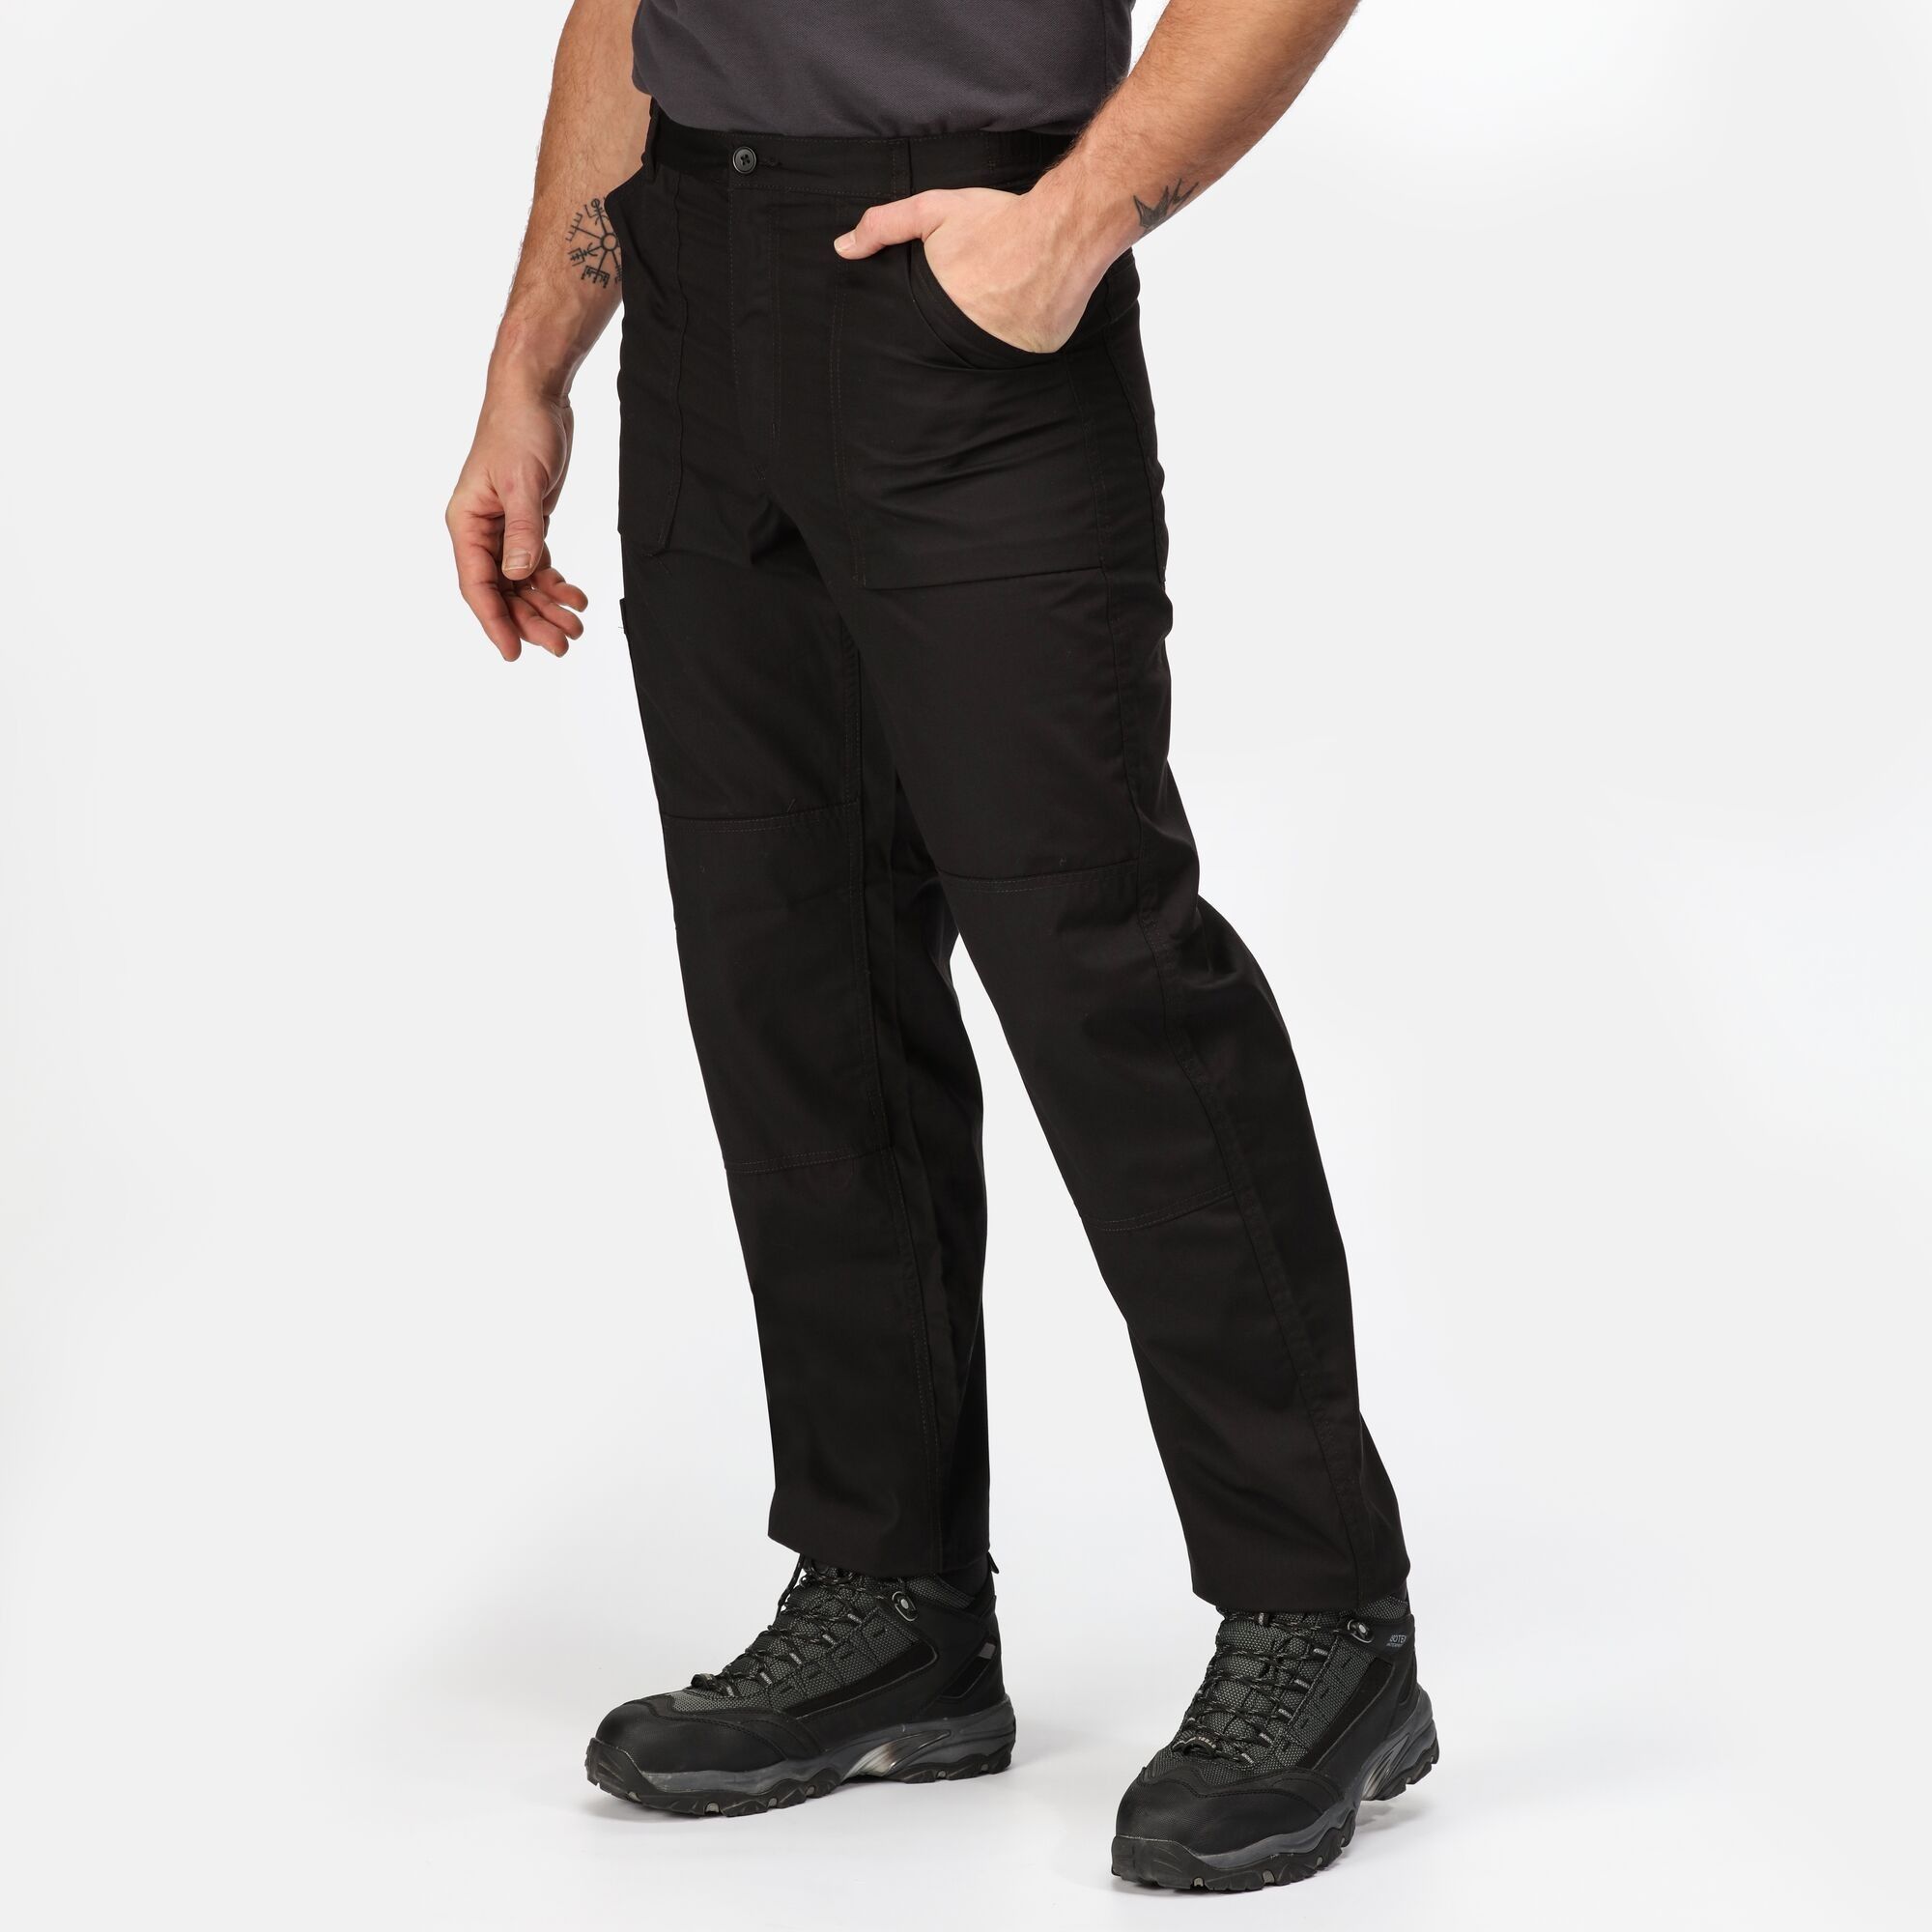 Waterproof trousers with multi-pocketed design. Knee patches. Ideal for wet weather. 100% polycotton. Wipe clean.